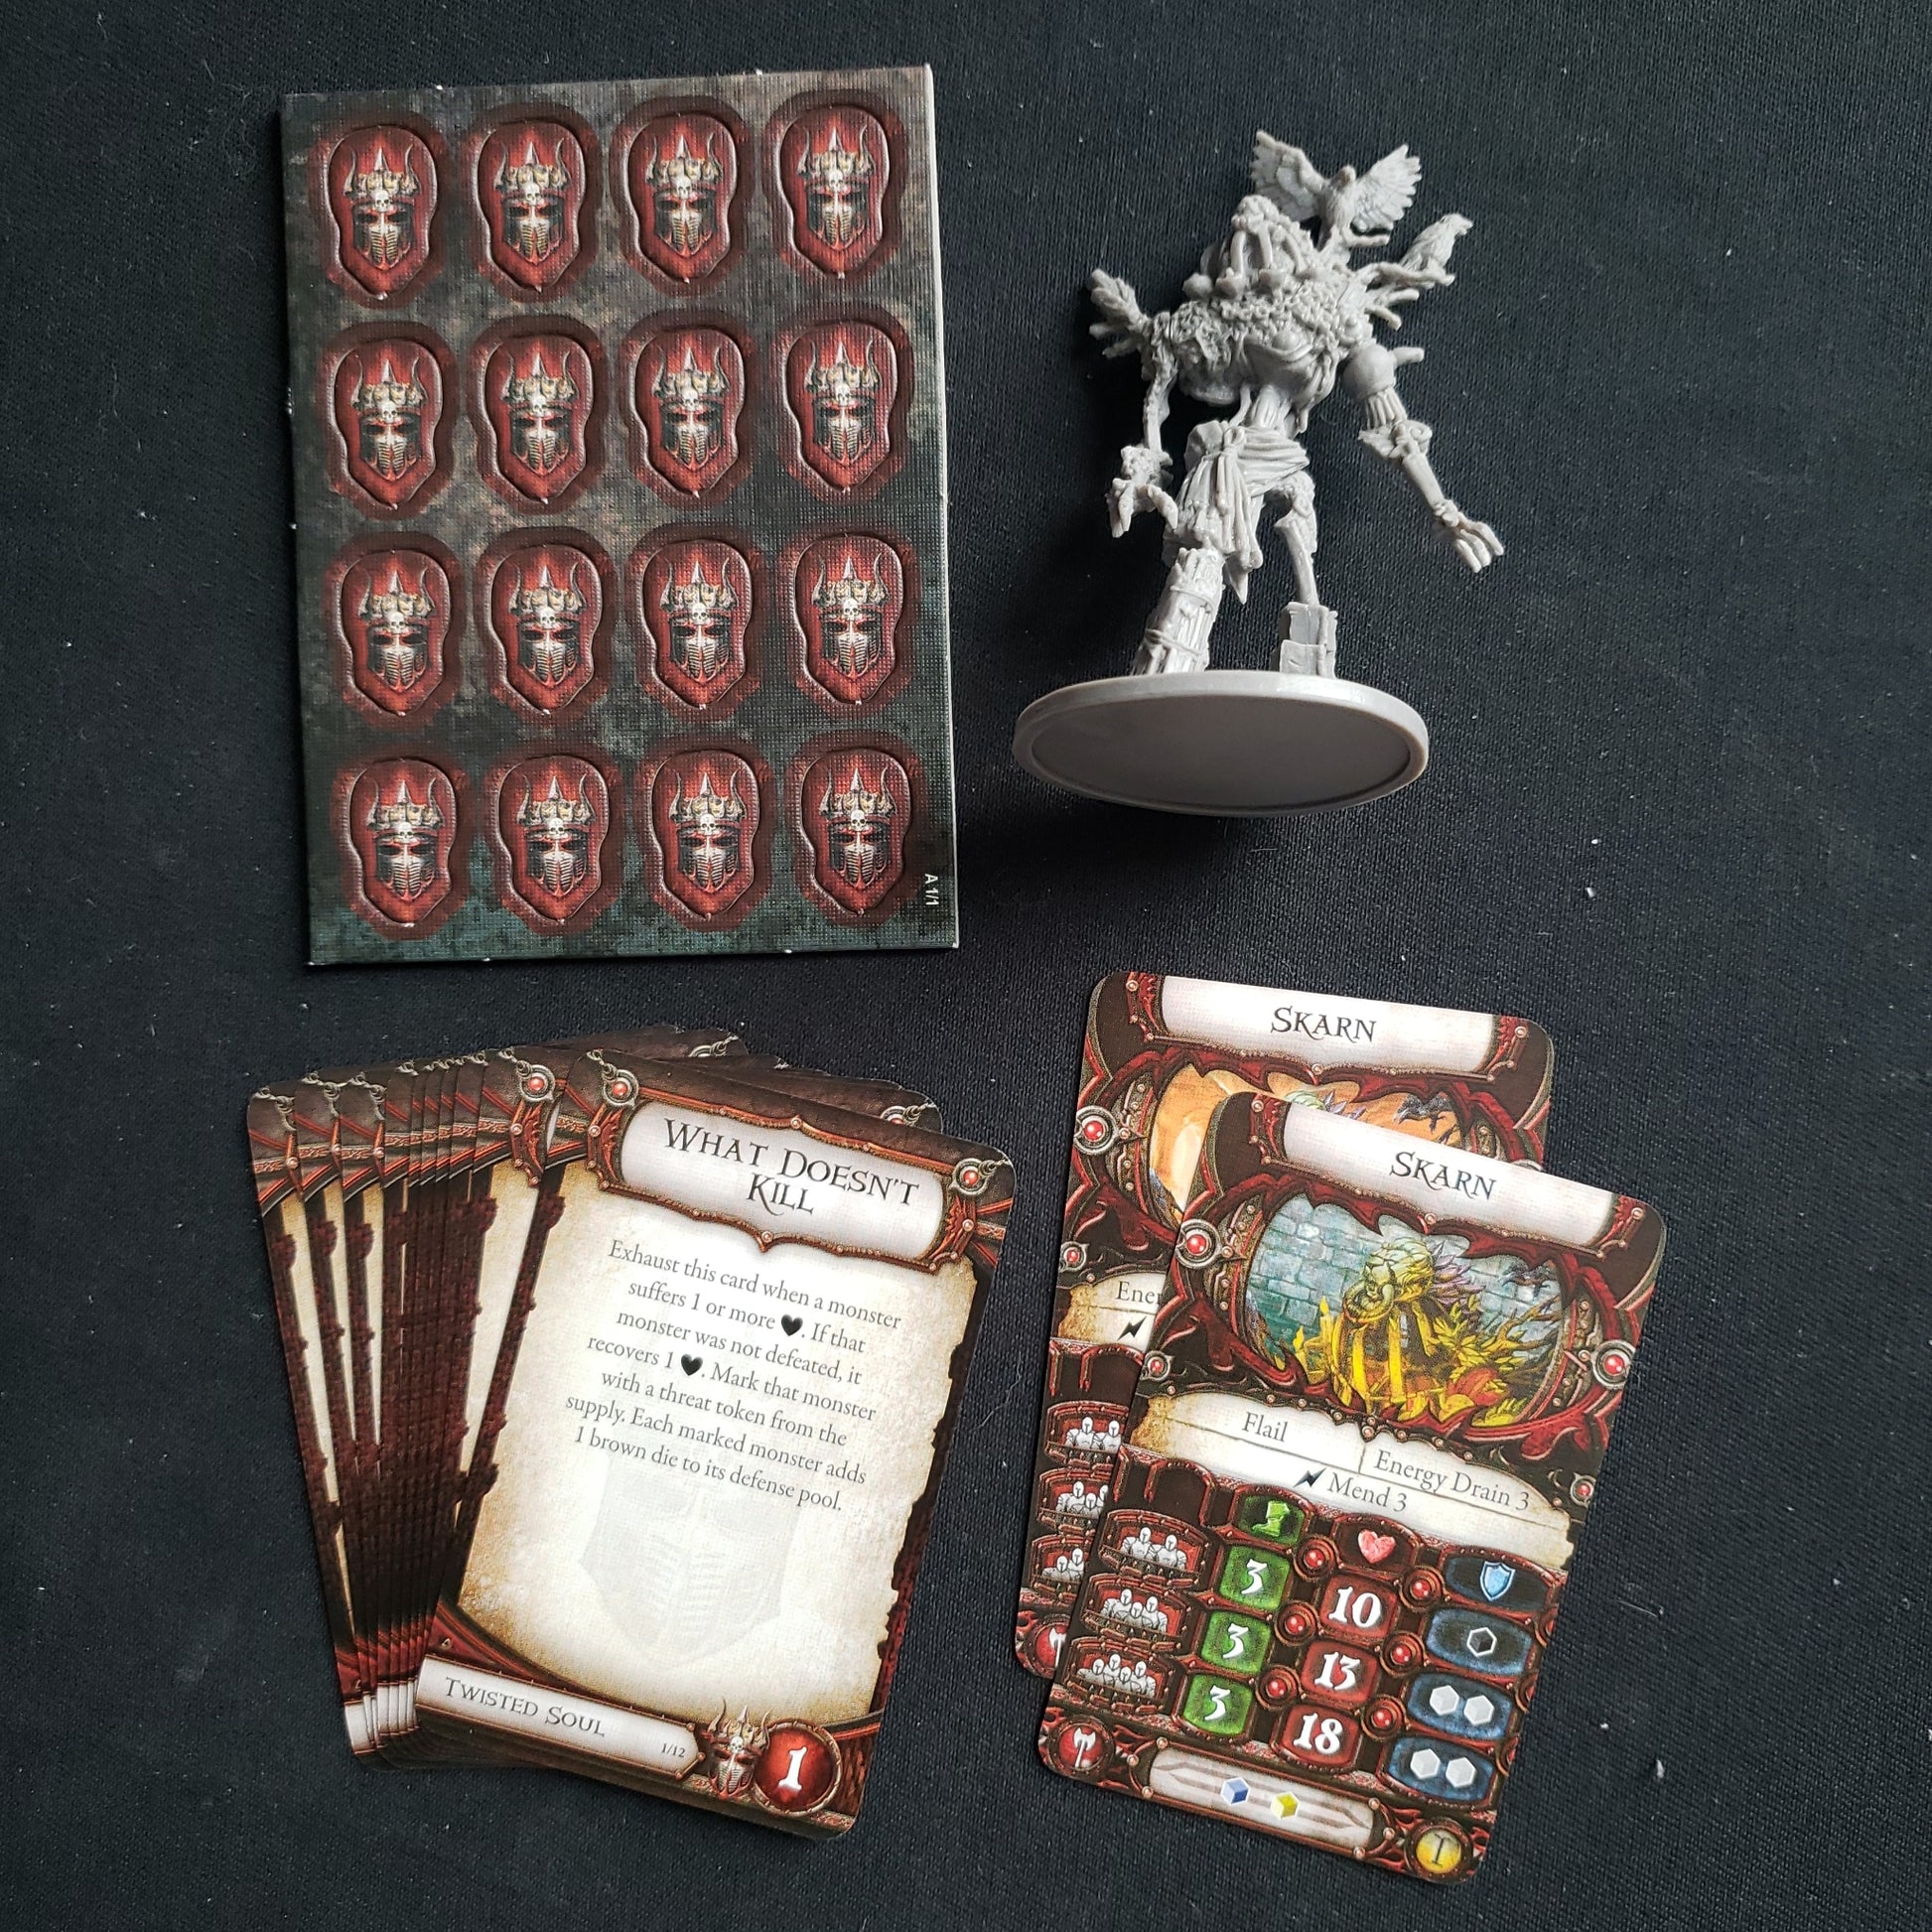 Image shows the components for the Skarn Lieutenant Pack expansion for the board game Descent: Journeys in the Dark Second Edition